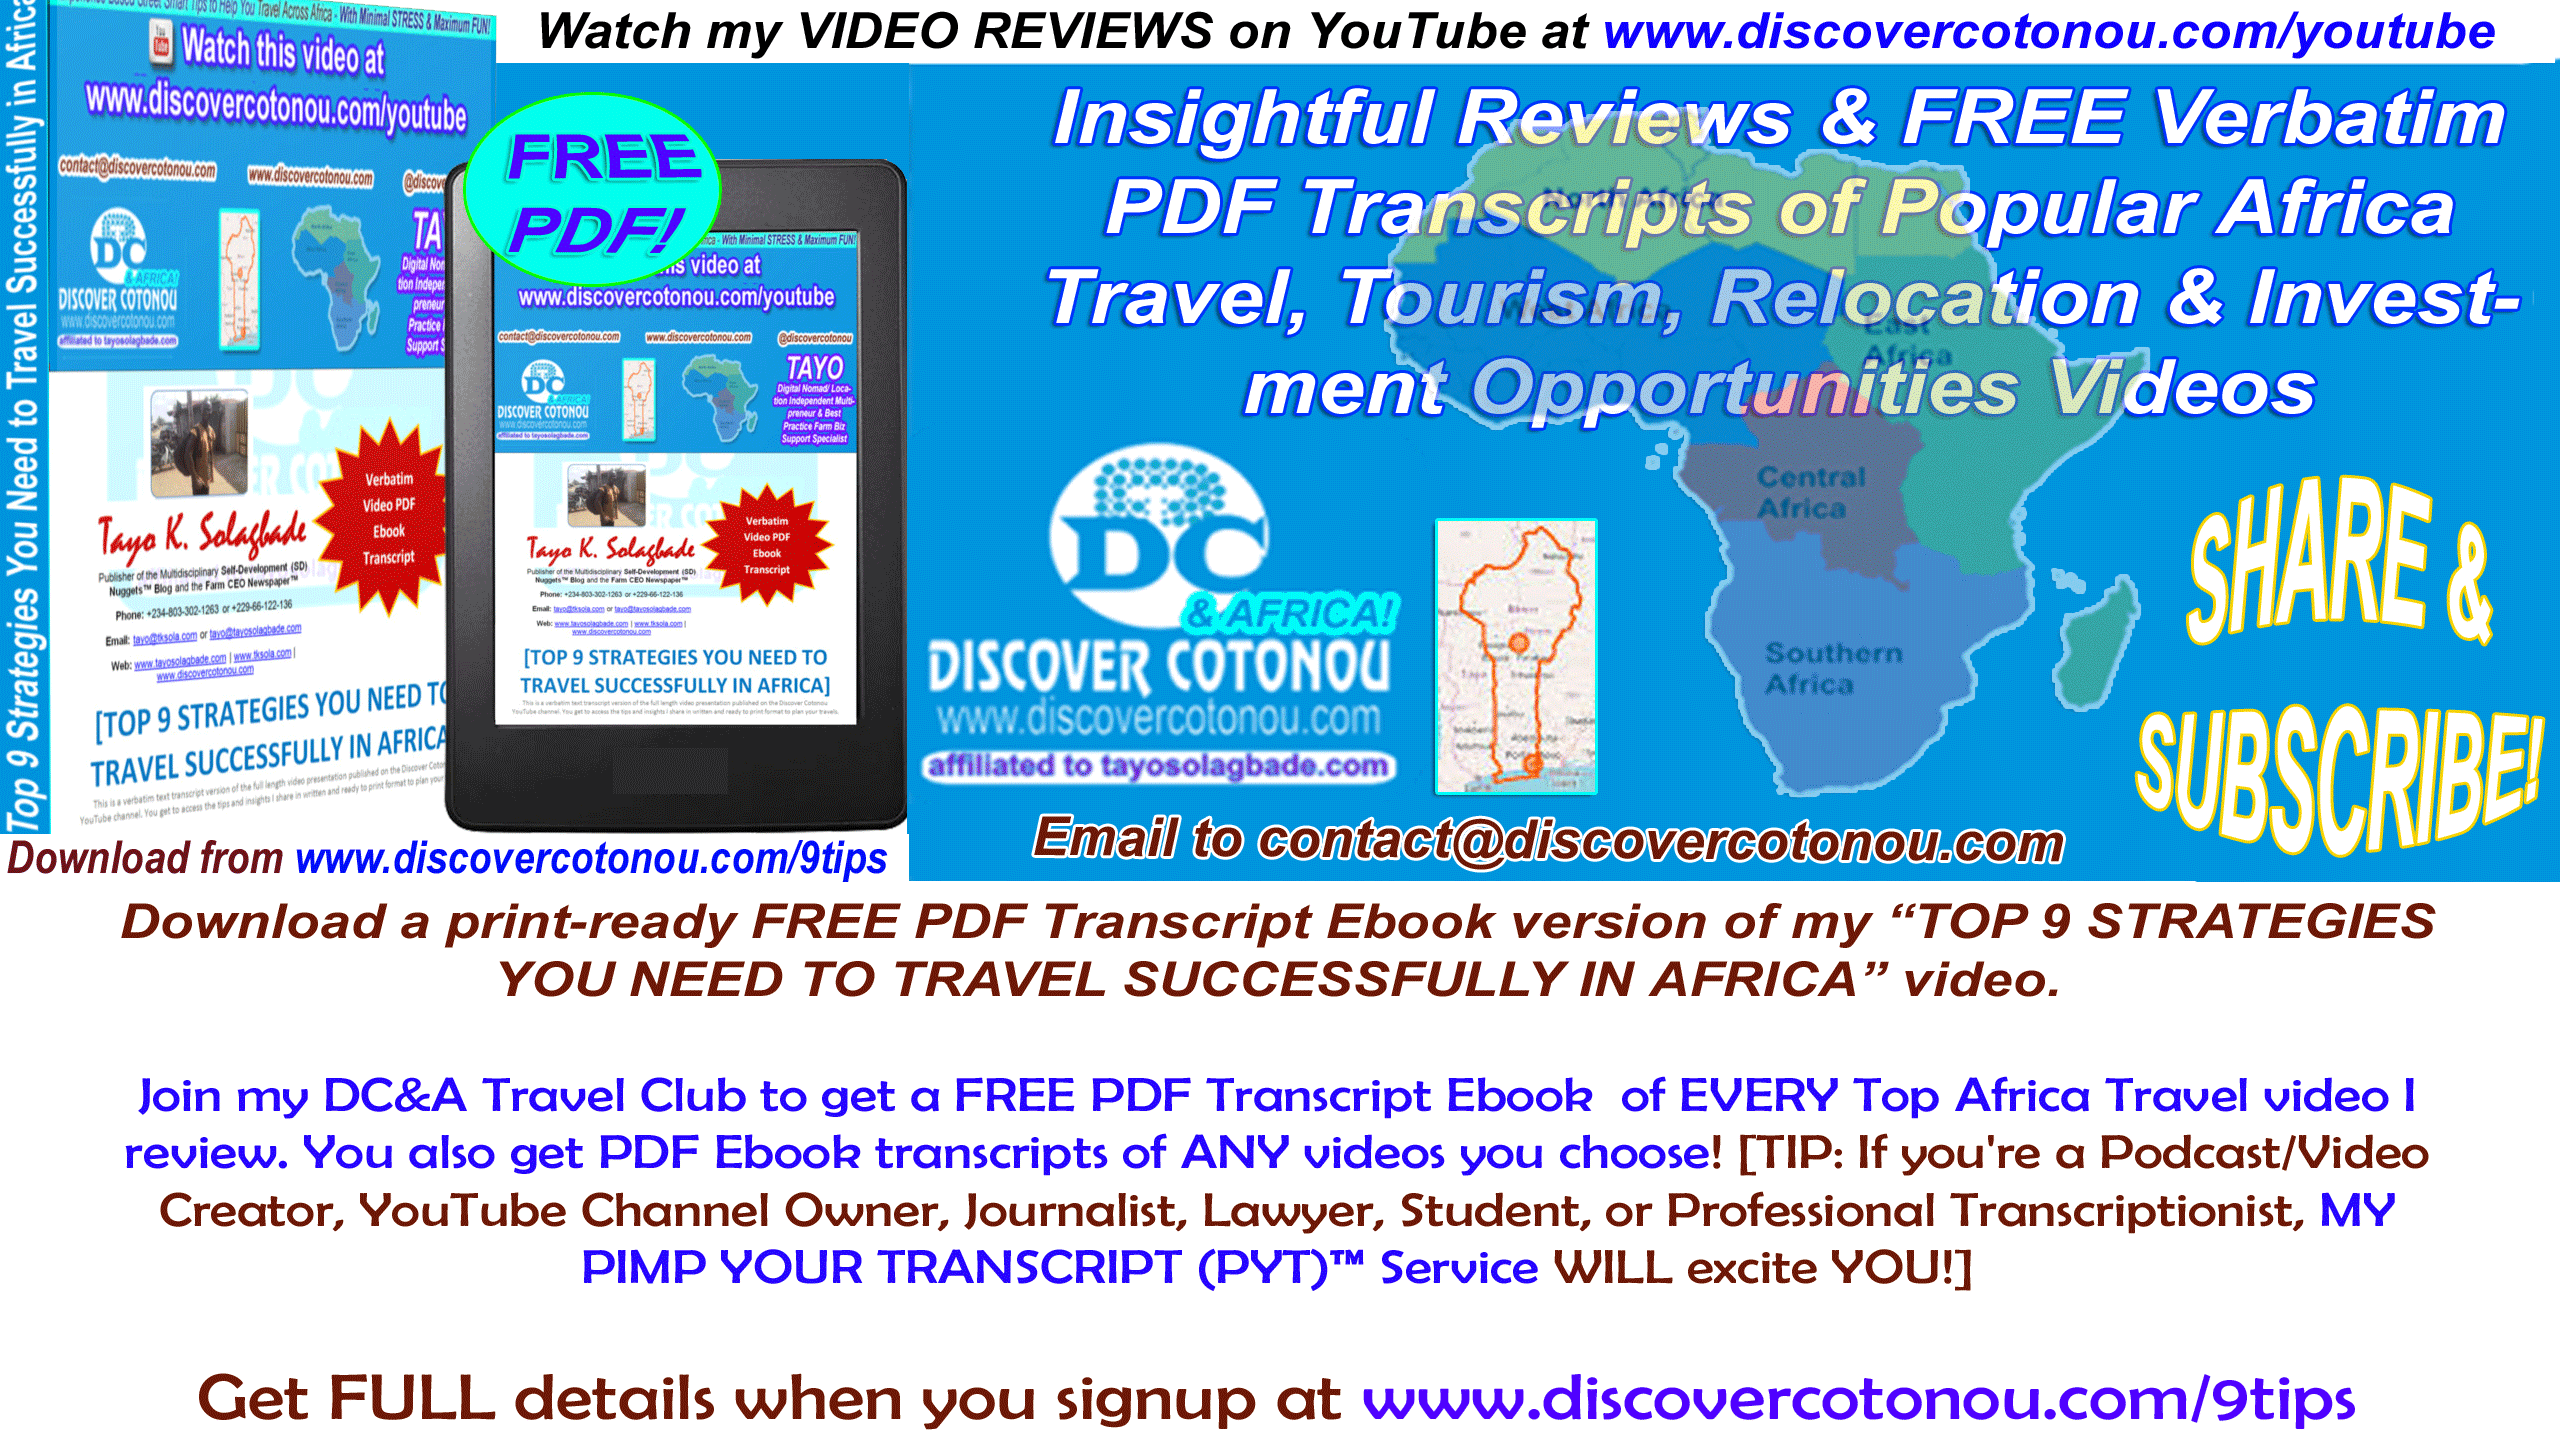 Join my DC&A Travel Club to get a FREE PDF Transcript Ebook  of EVERY Top Africa Travel video I review.